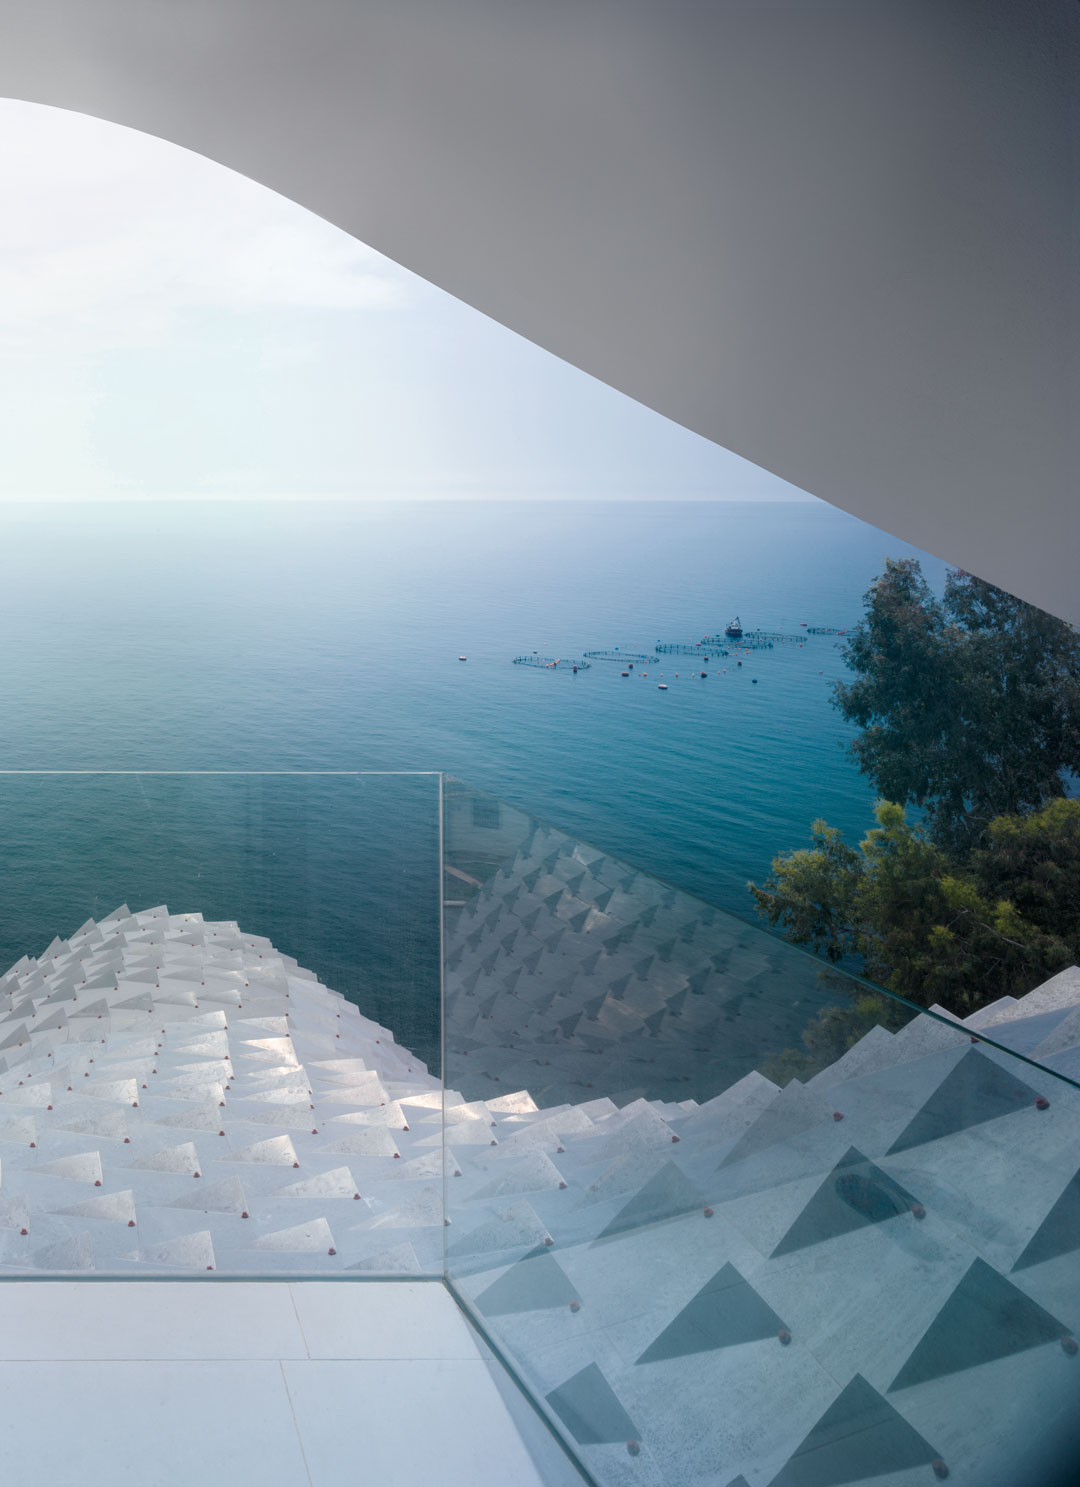 The House on the Cliff, near Granada, Spain. As featured in Living on Water